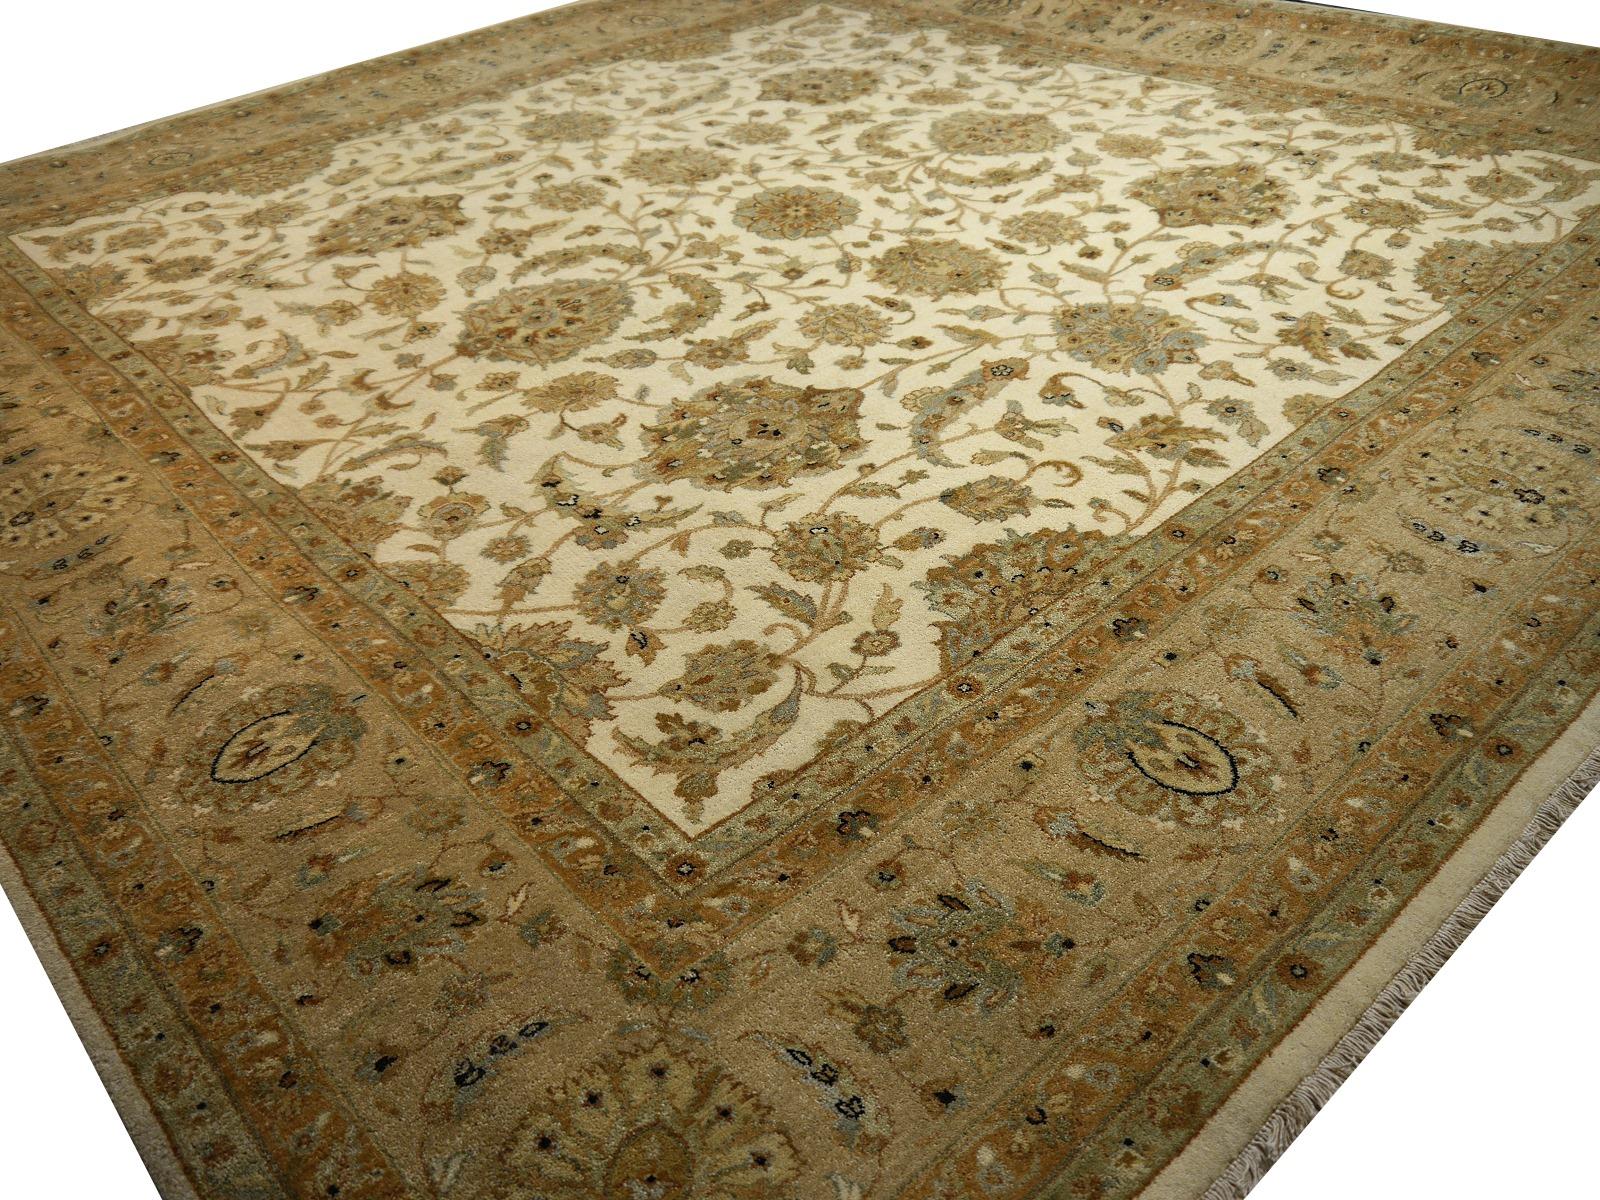 Square Ziegler Mahal Design Rug Wool Pile Beige Green from India 7